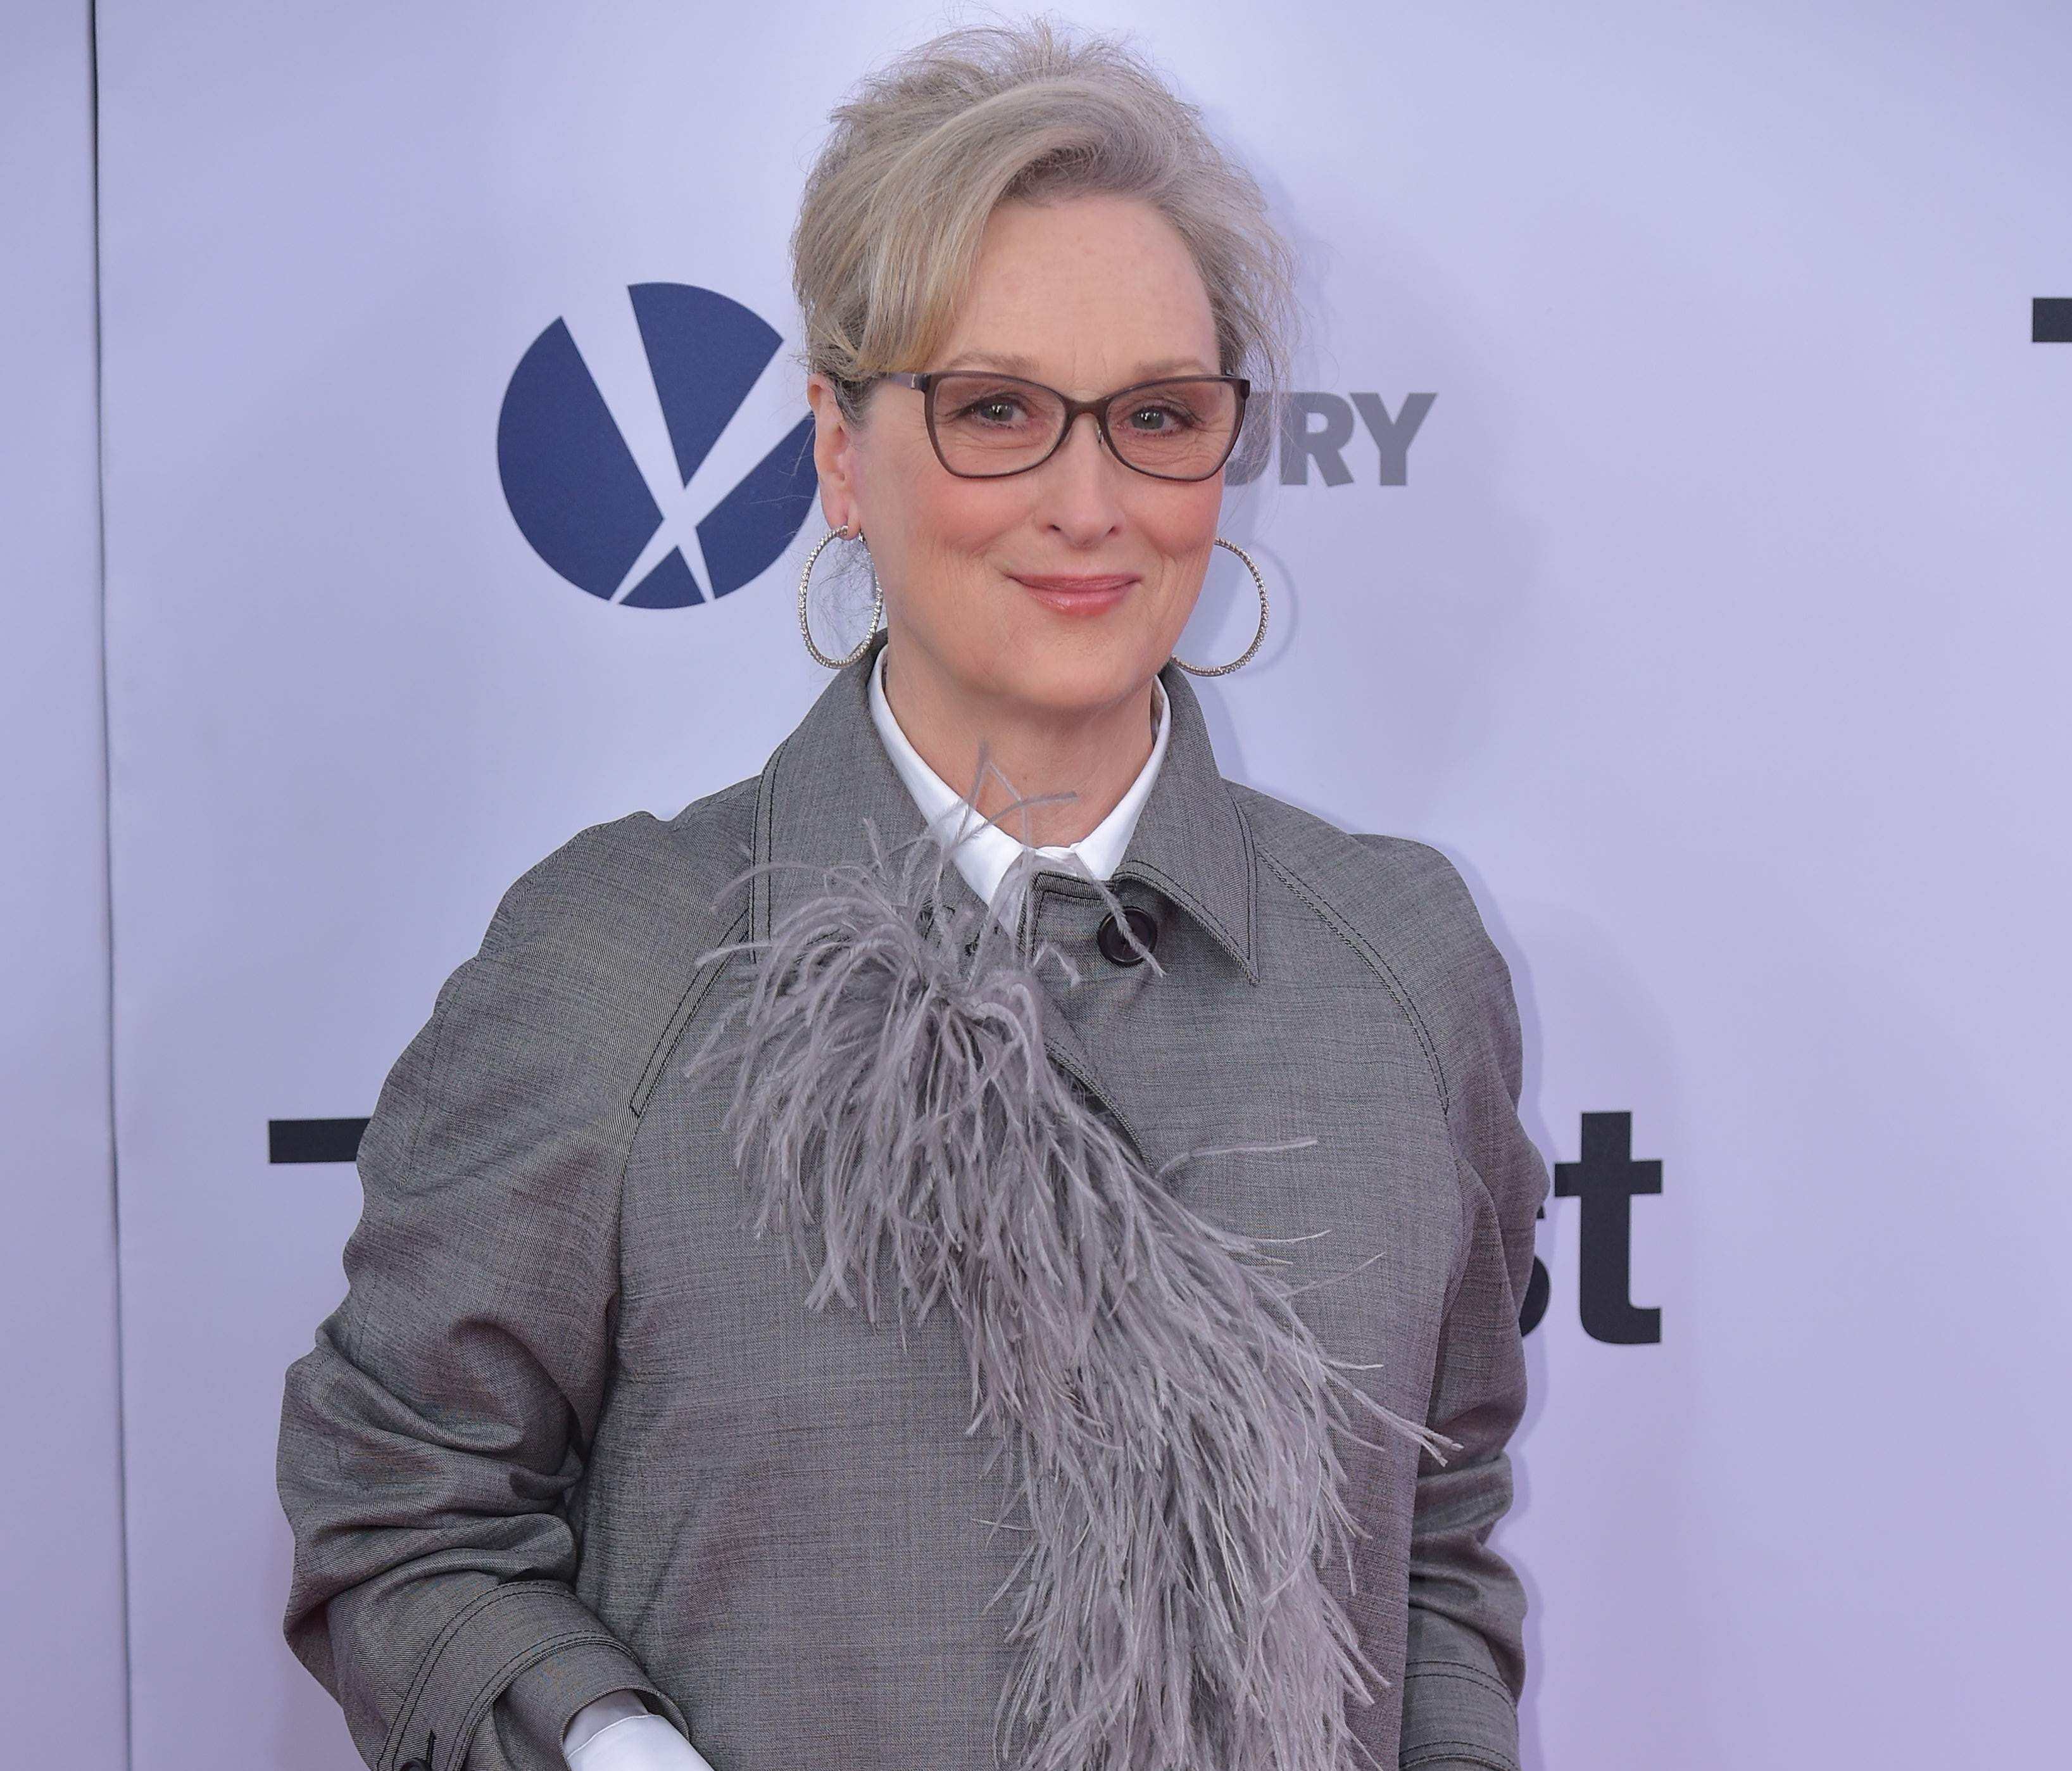 Meryl Streep arrives for the premiere of 'The Post' on Dec. 14.